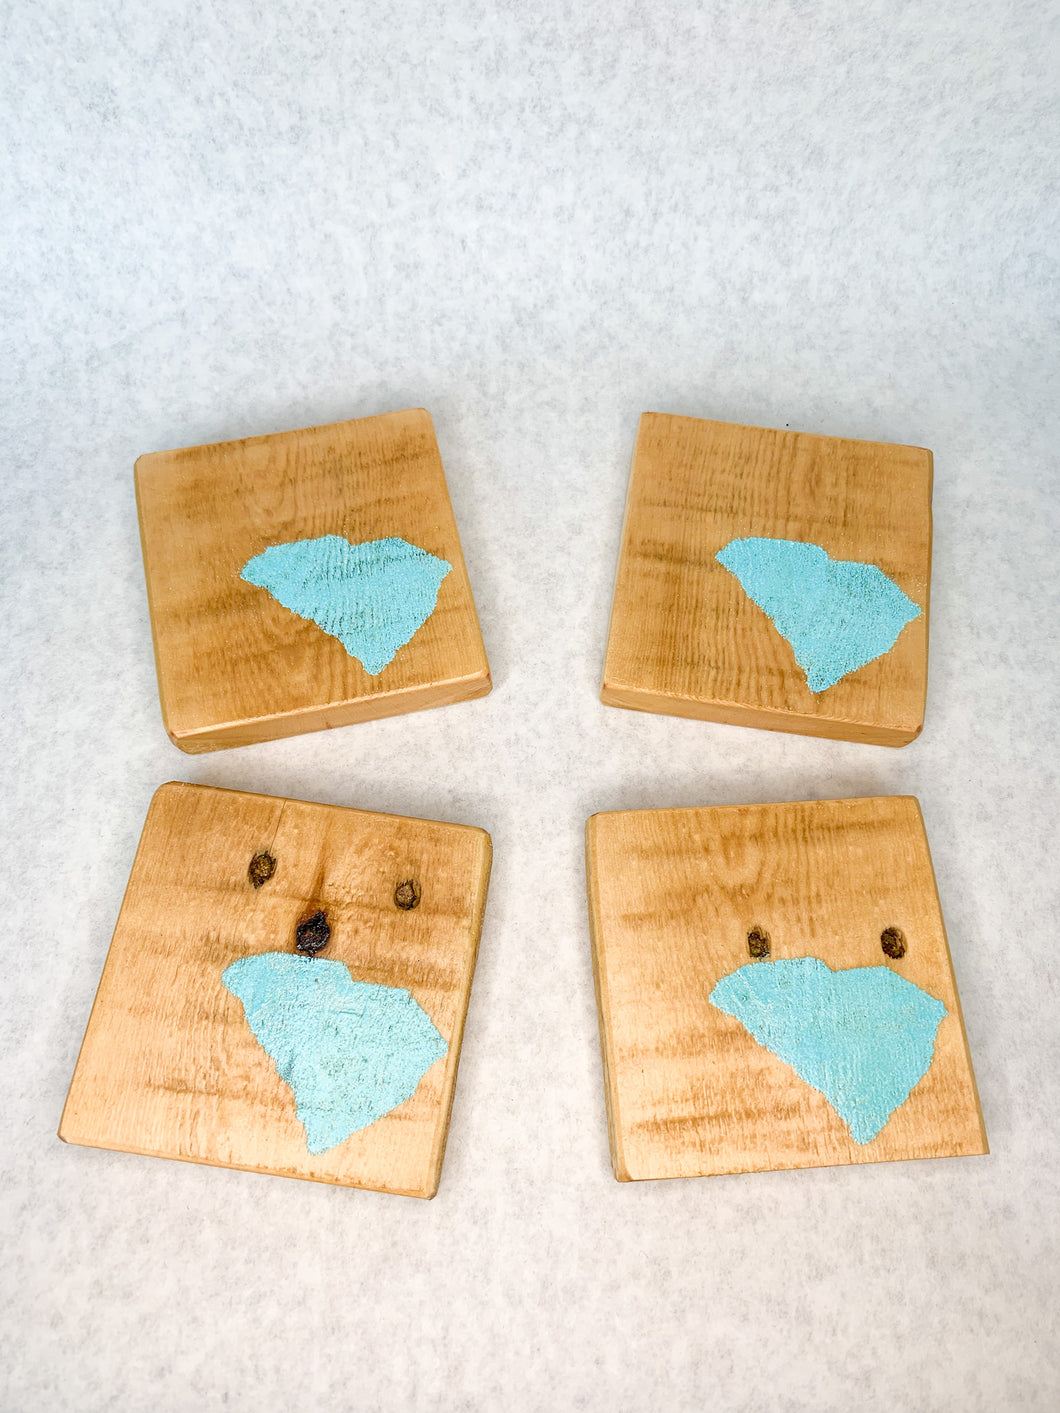 Natural State of South Carolina Coasters with Light Blue Accent- Set of 4